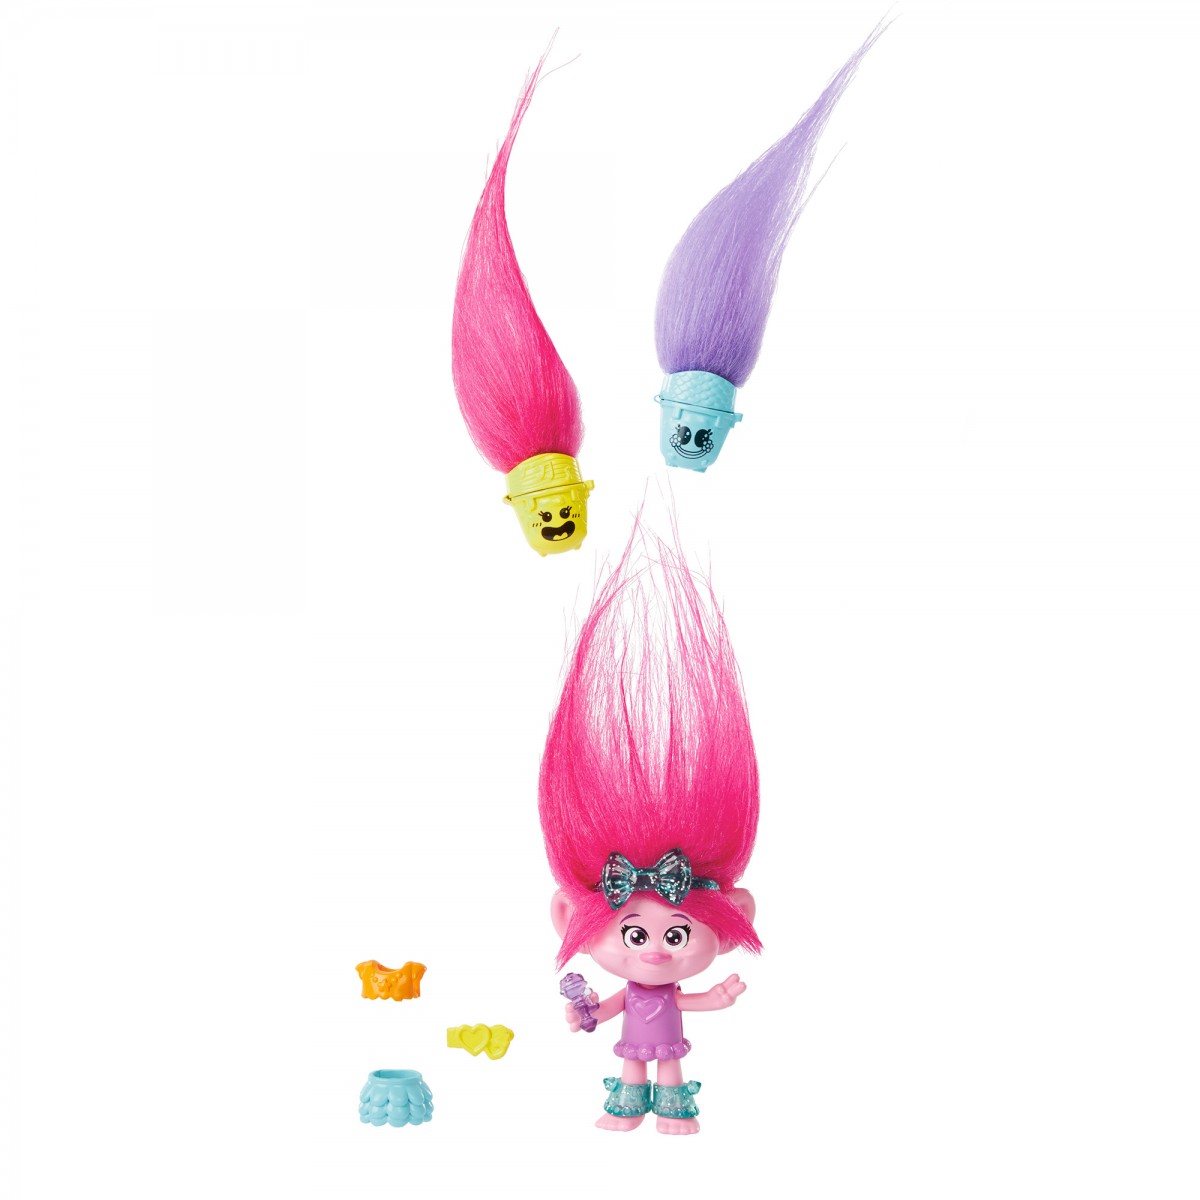 50% Off Trolls Surprise Blind Bags at Target (In-Store & Online)